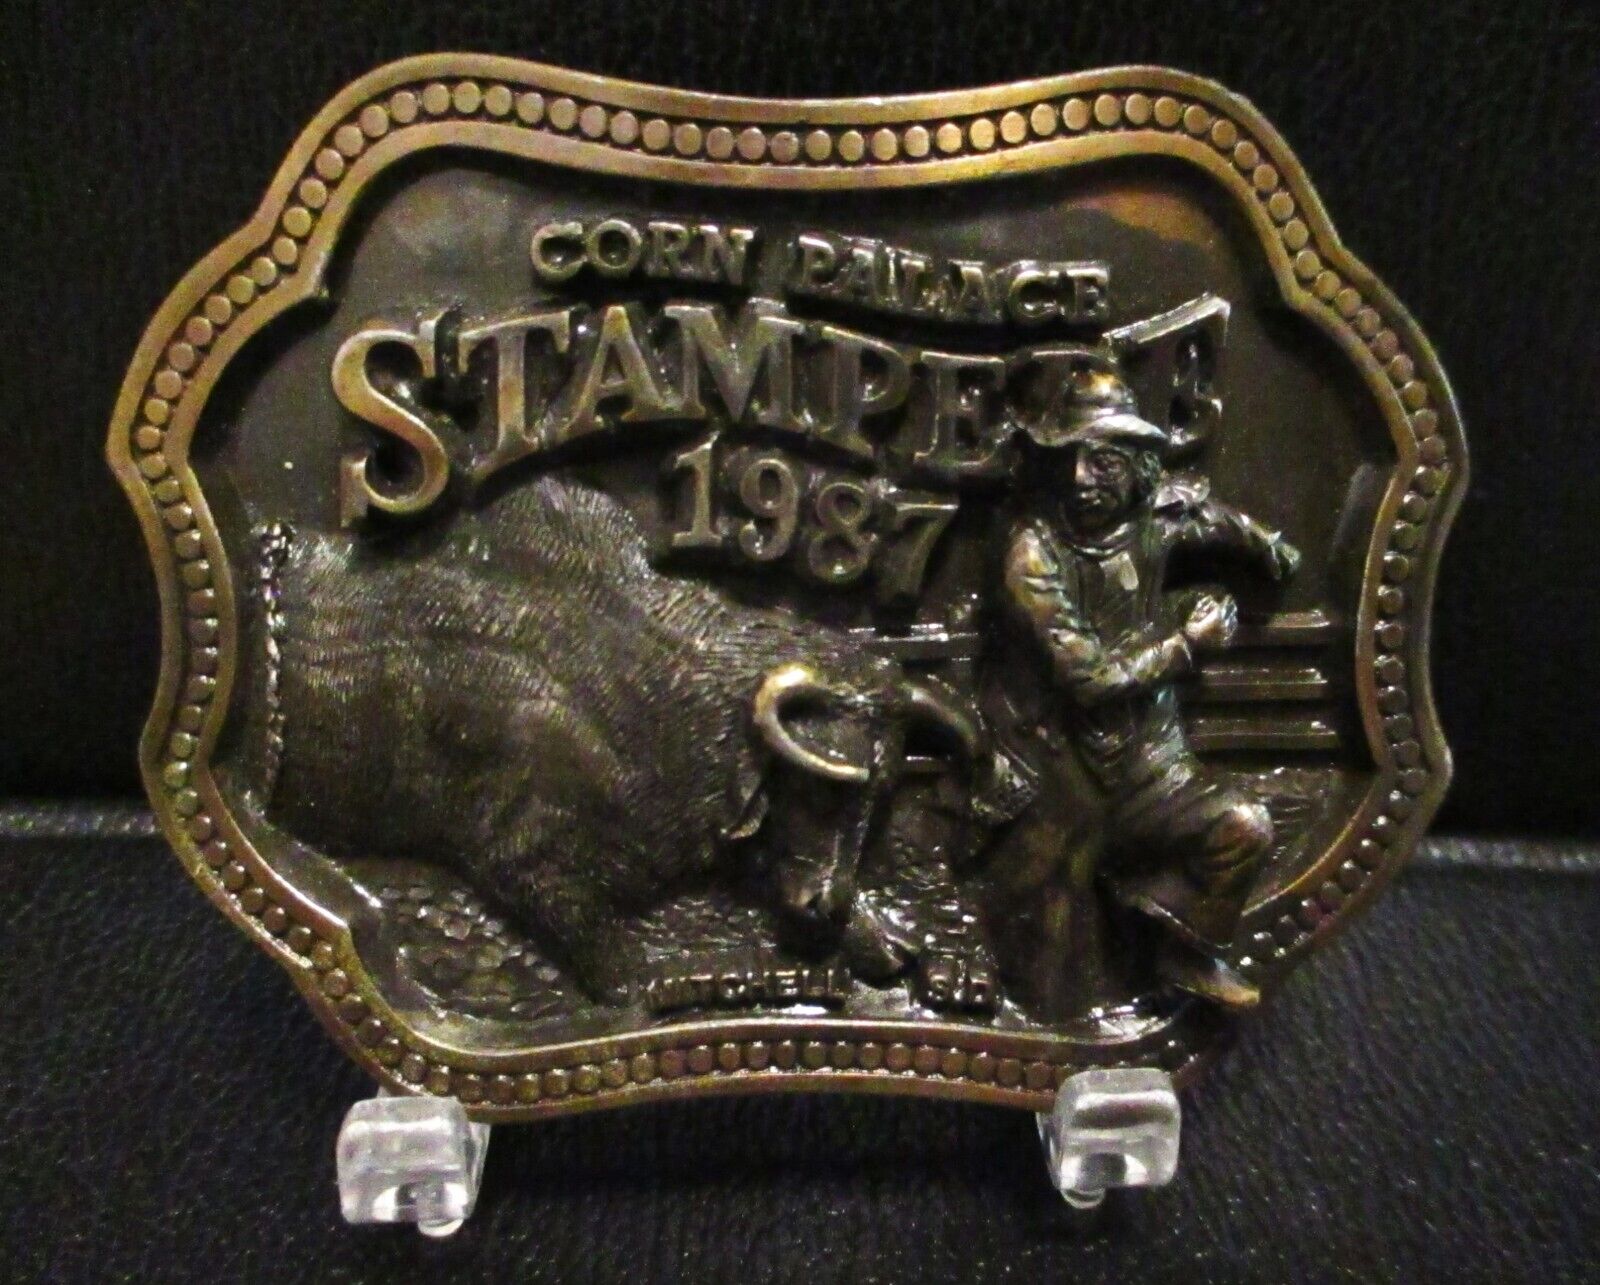 17th Corn Palace Stampede Mitchell SD PRCA Rodeo Bull Clown 1987 Belt Buckle LE